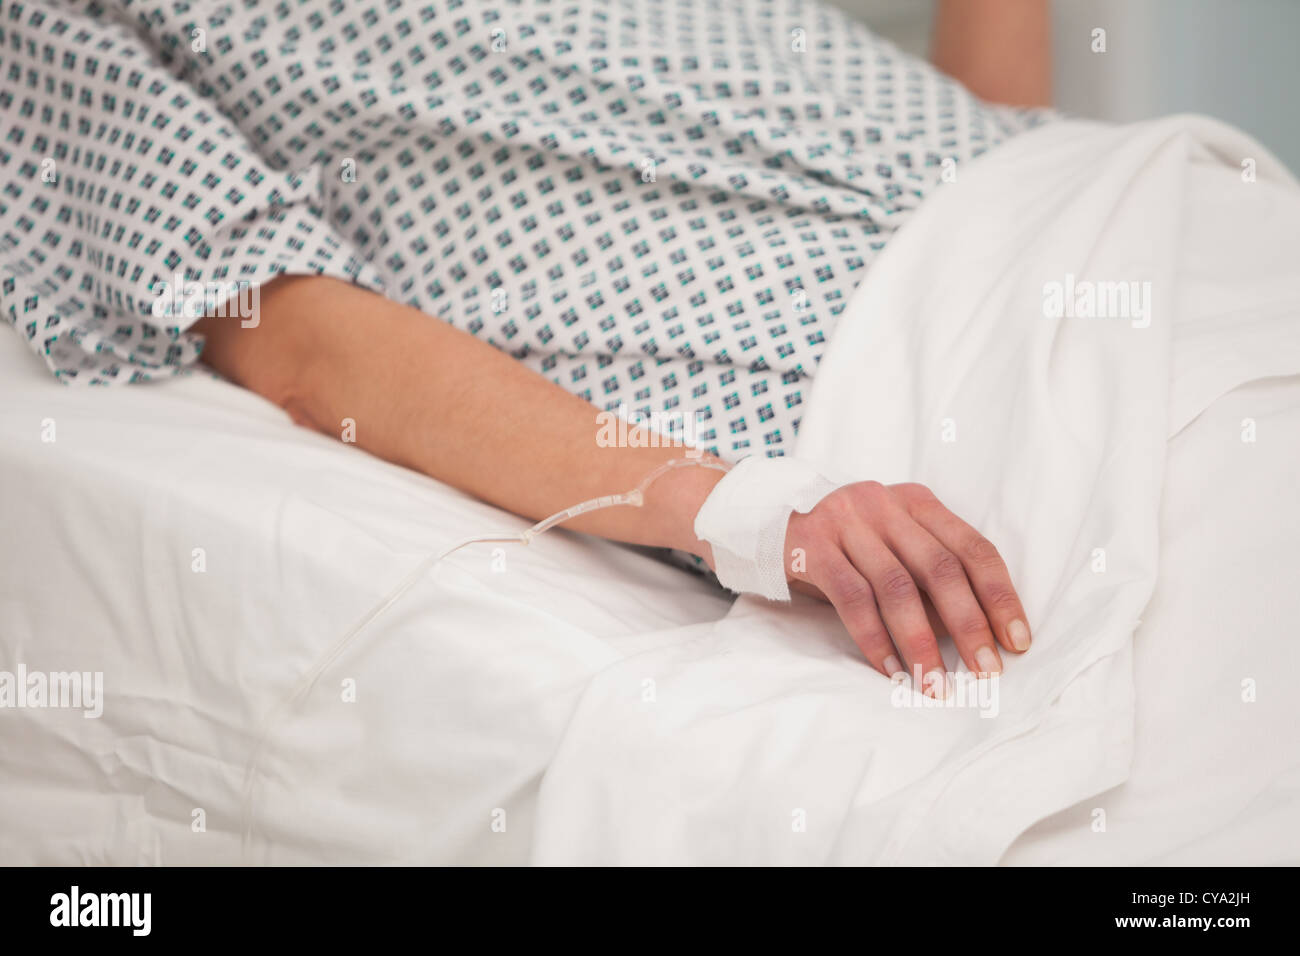 Arm attached to intravenous drip Stock Photo